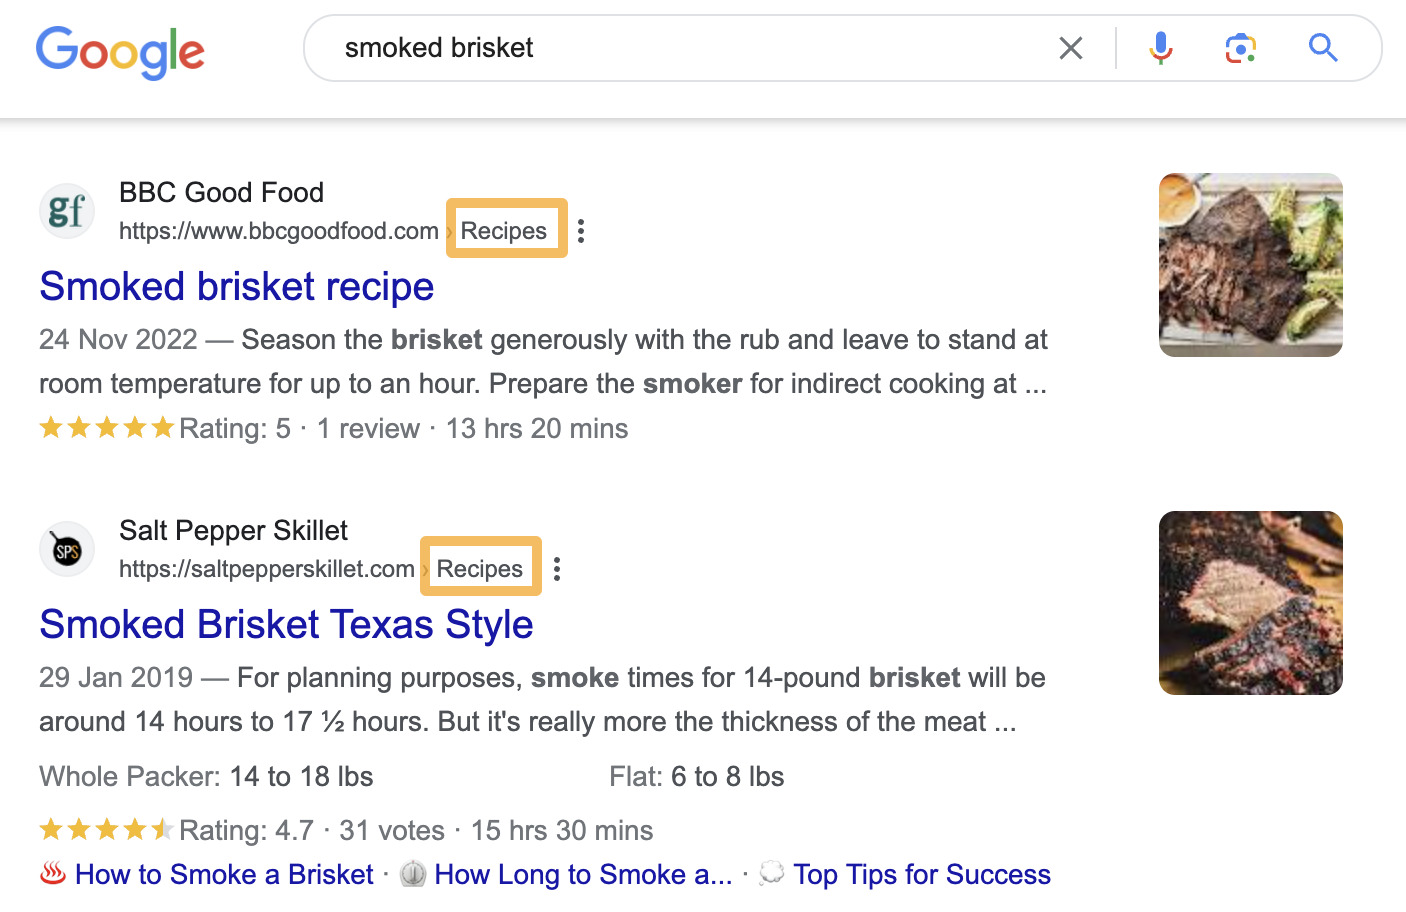 People are looking for recipes and how-tos when searching for "smoked brisket"
